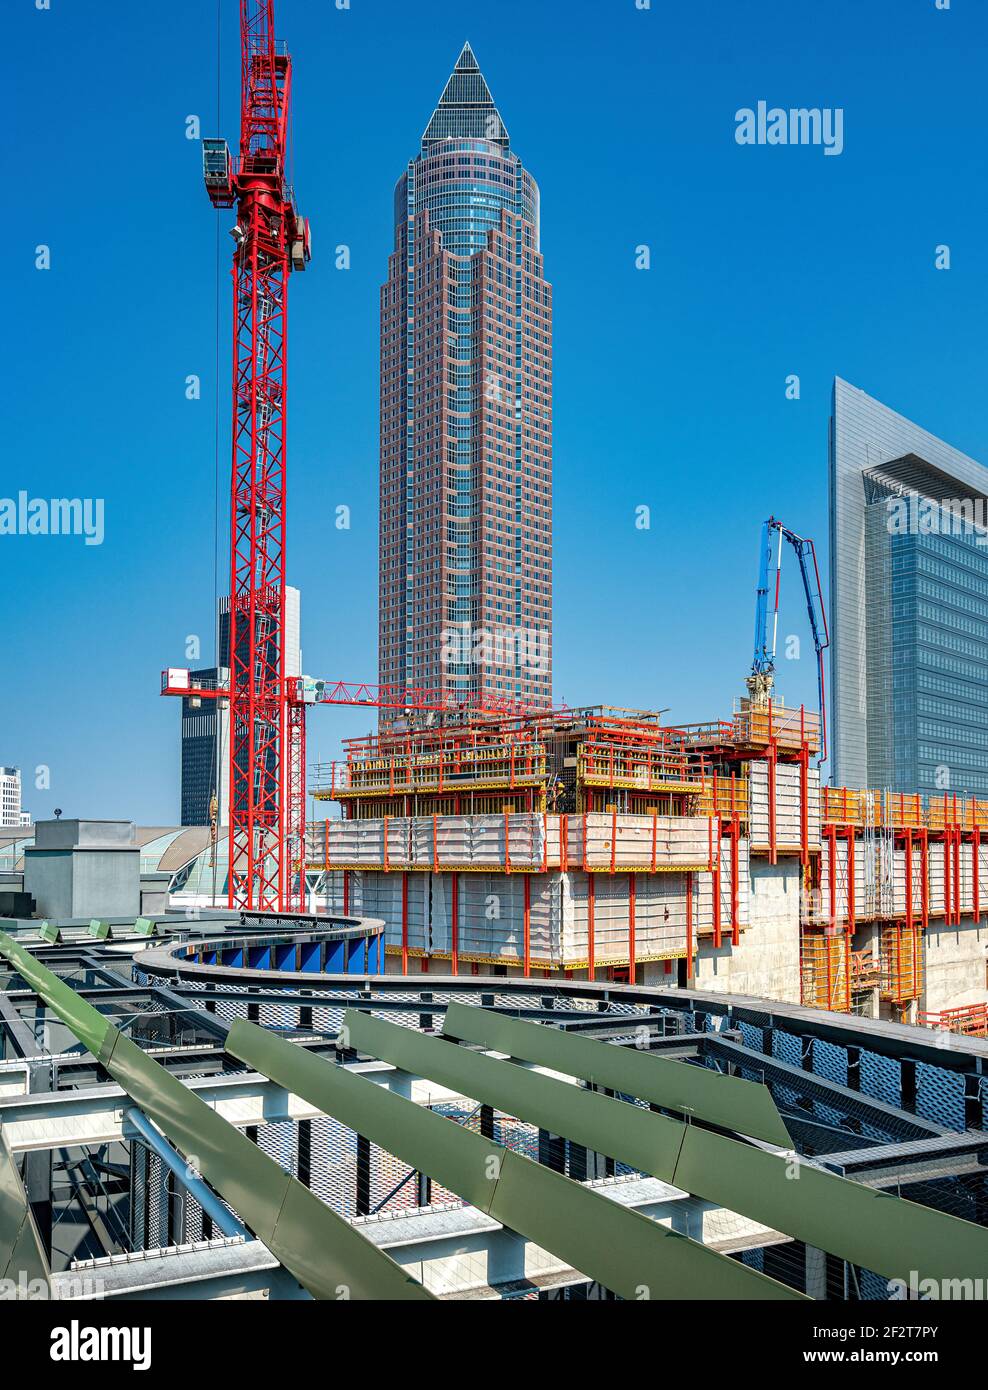 Skyscrapers and shopping centers in the newly built europaviertel in frankfurt am main, germany Stock Photo